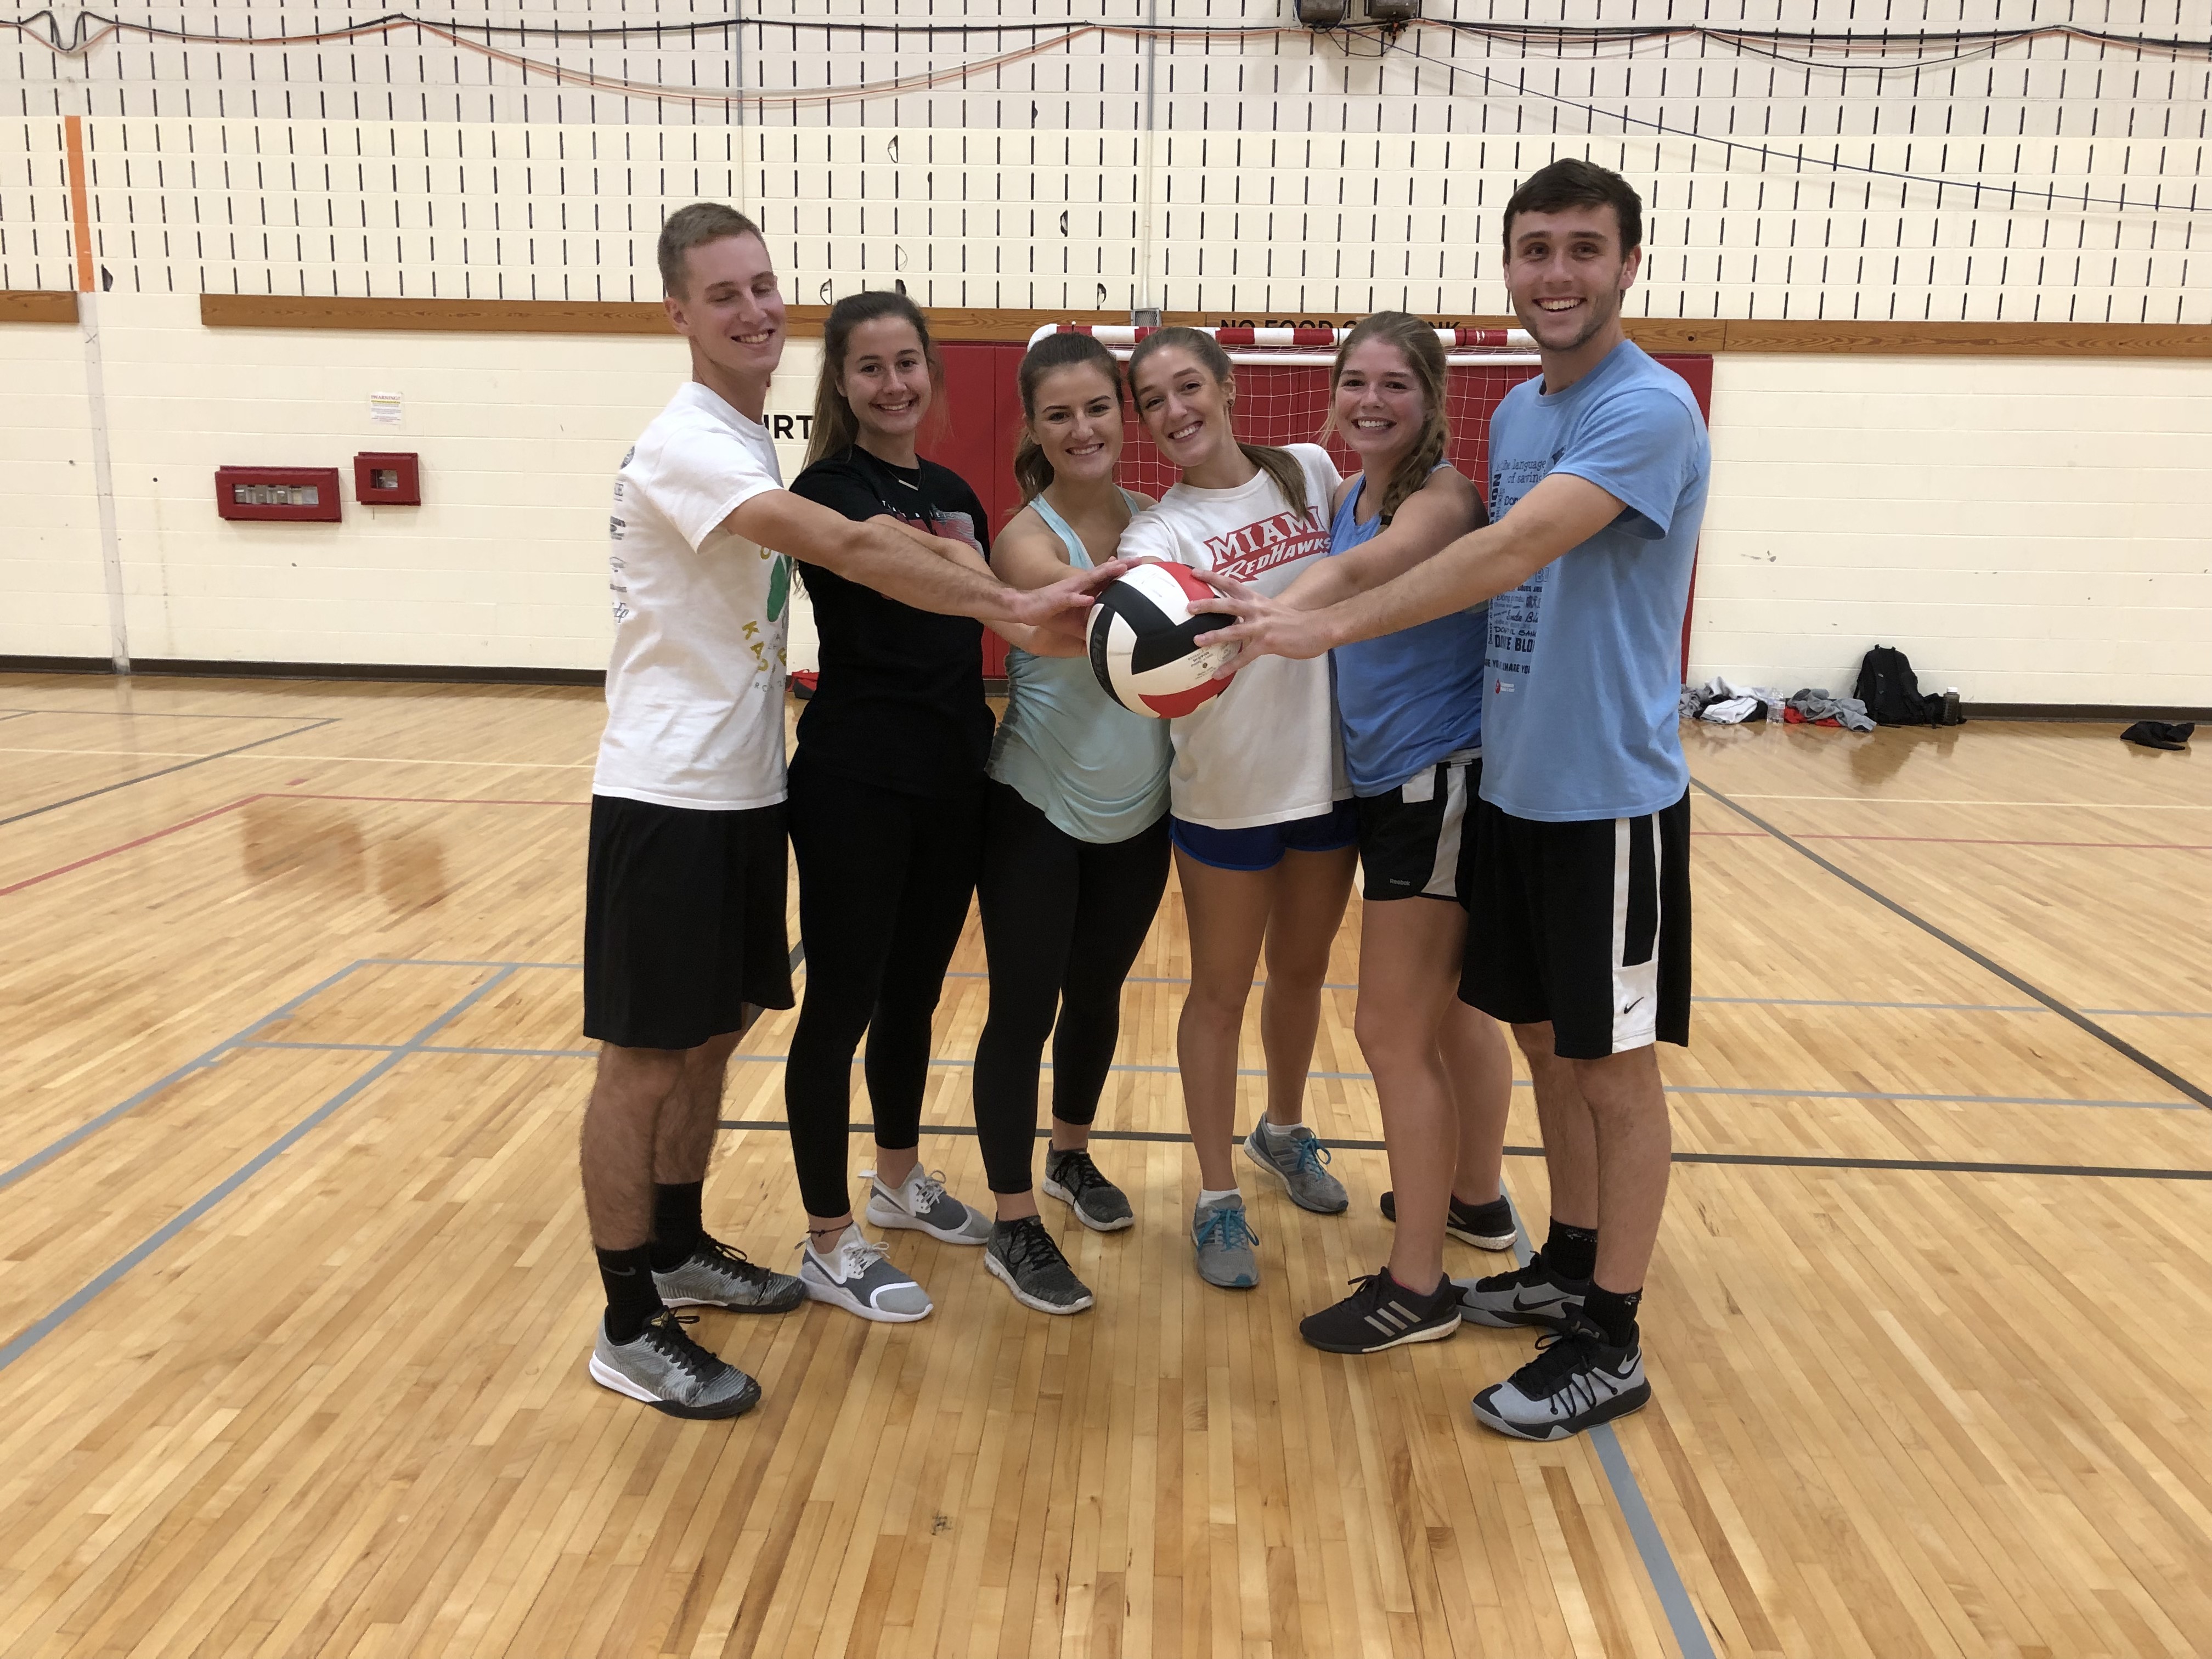 Indoor volleyball runner up team poses together with one hand of each player touching the game-used volleyball.